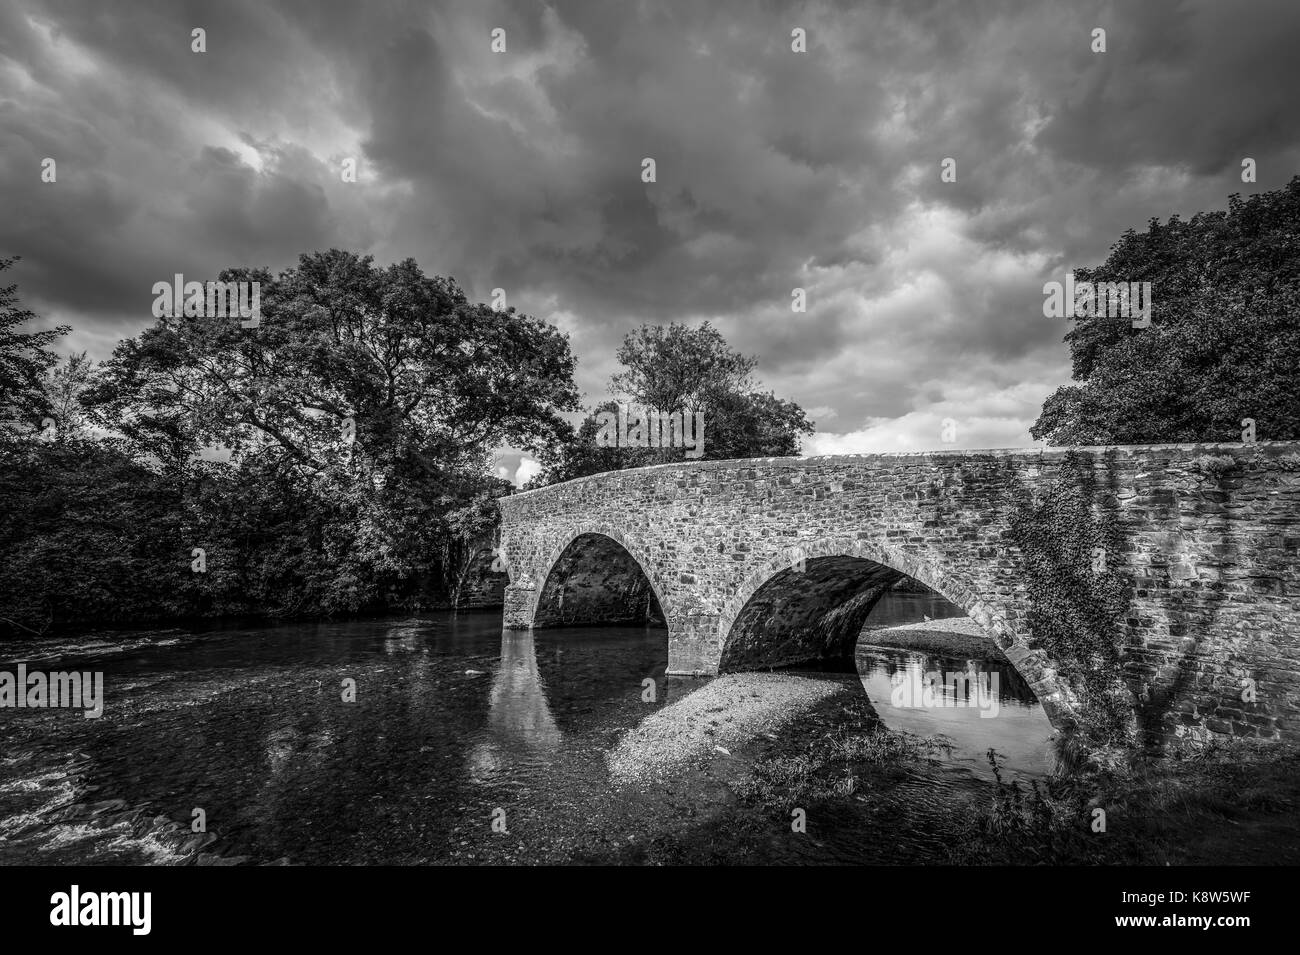 View of the bridge over the River Exe, Exebridge, a village on the border of Devon and Somerset, England at the confluence of the Barle and Exe rivers Stock Photo